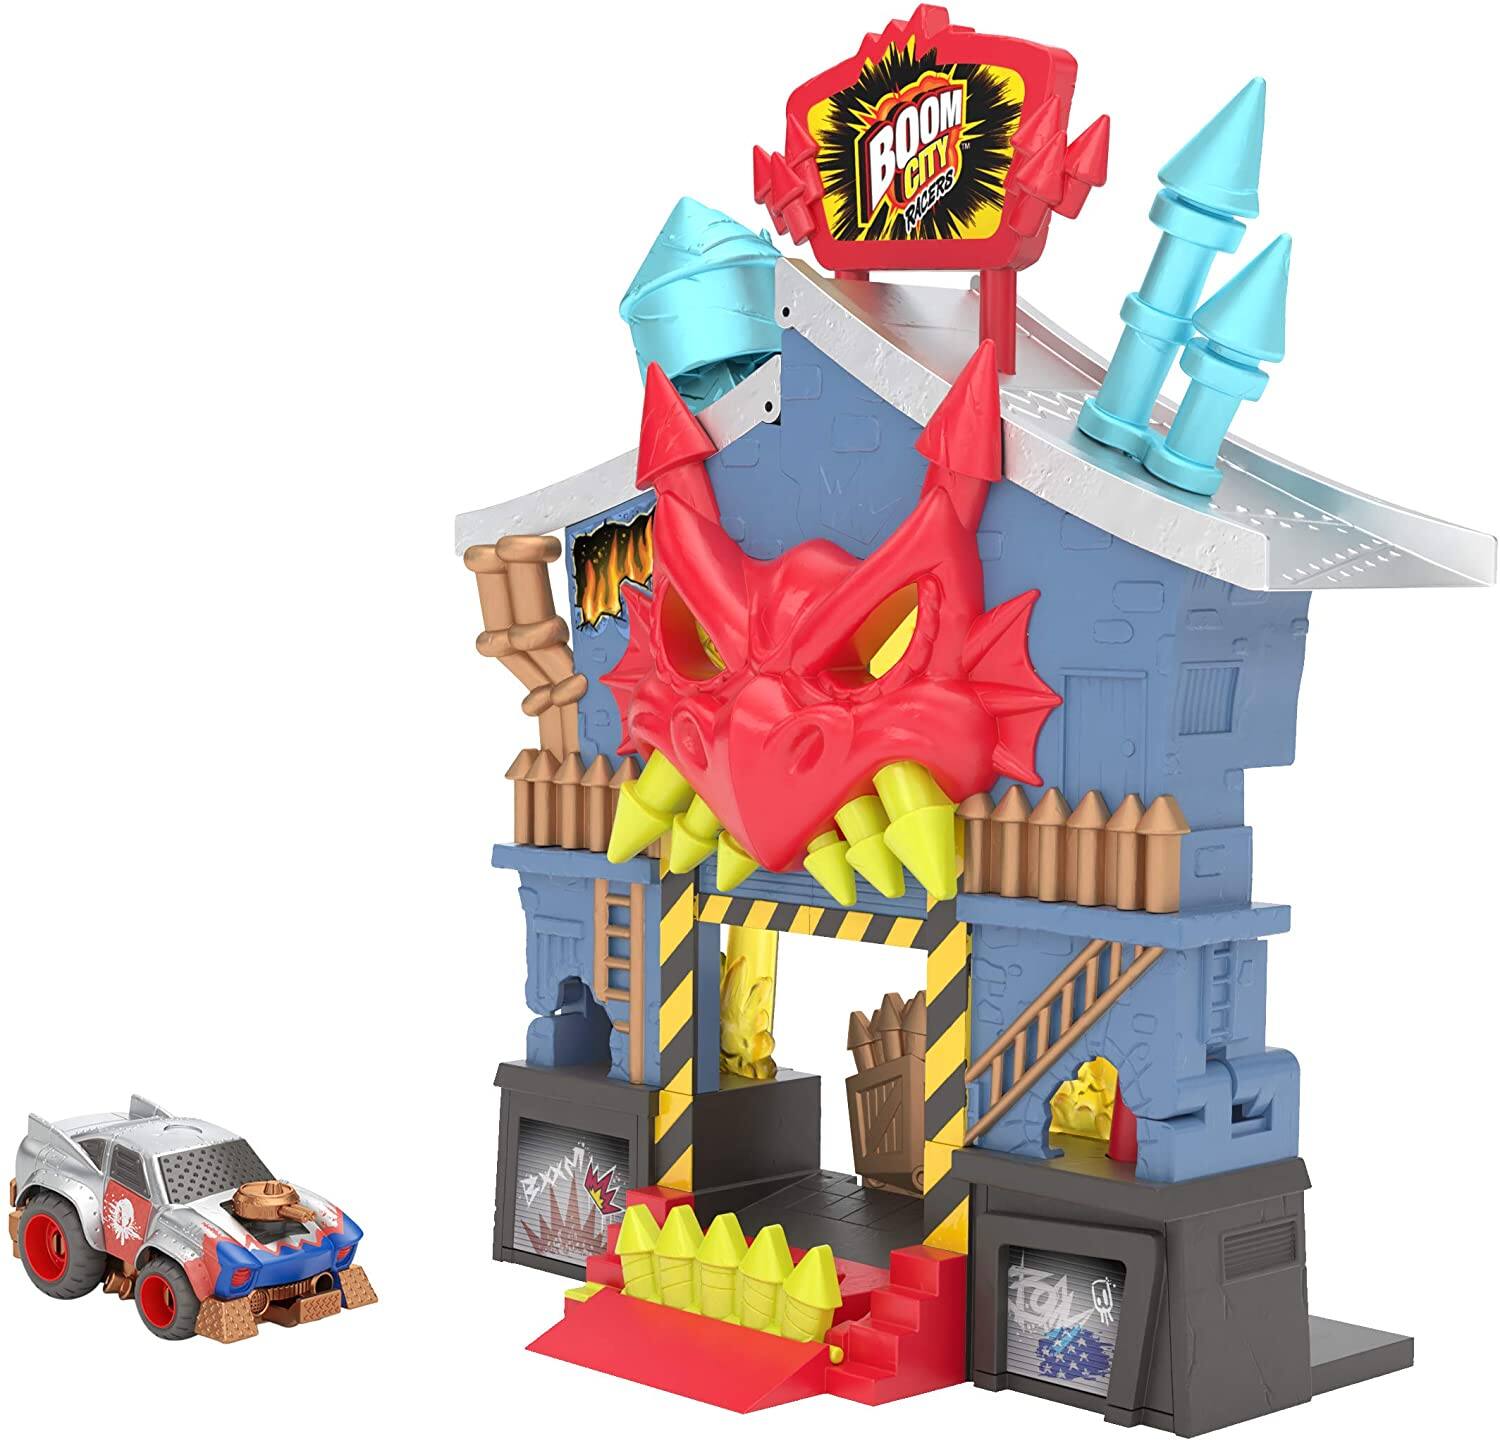 Boom City Racers Fireworks Factory 3-in-1 Transforming Playset $8.65 at Amazon